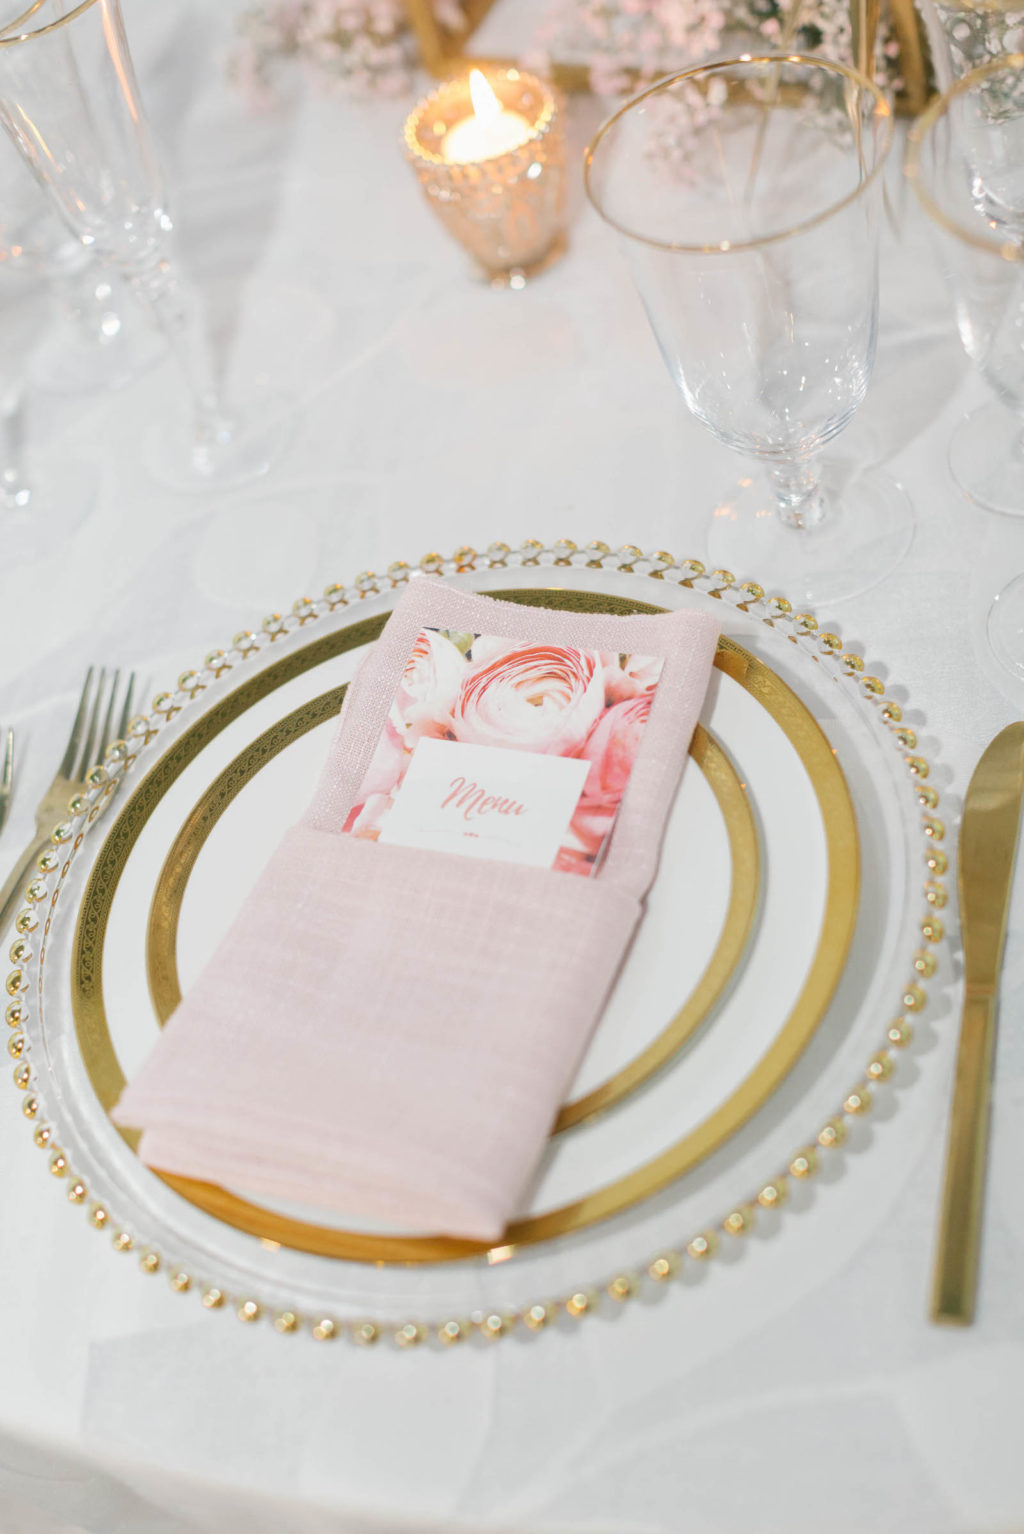 Clearwater Beach Wedding Venue Bellwether Beach Resort Styled With Love Something Bleu by McKenna Bleu | Instagram Wedding Designer Inspiration | Reception Table Linen with Gold Beaded Edge Charger and Gold Flatware with Blush Pink Napkin and Floral Menu Card and Gold Rim China and Glassware